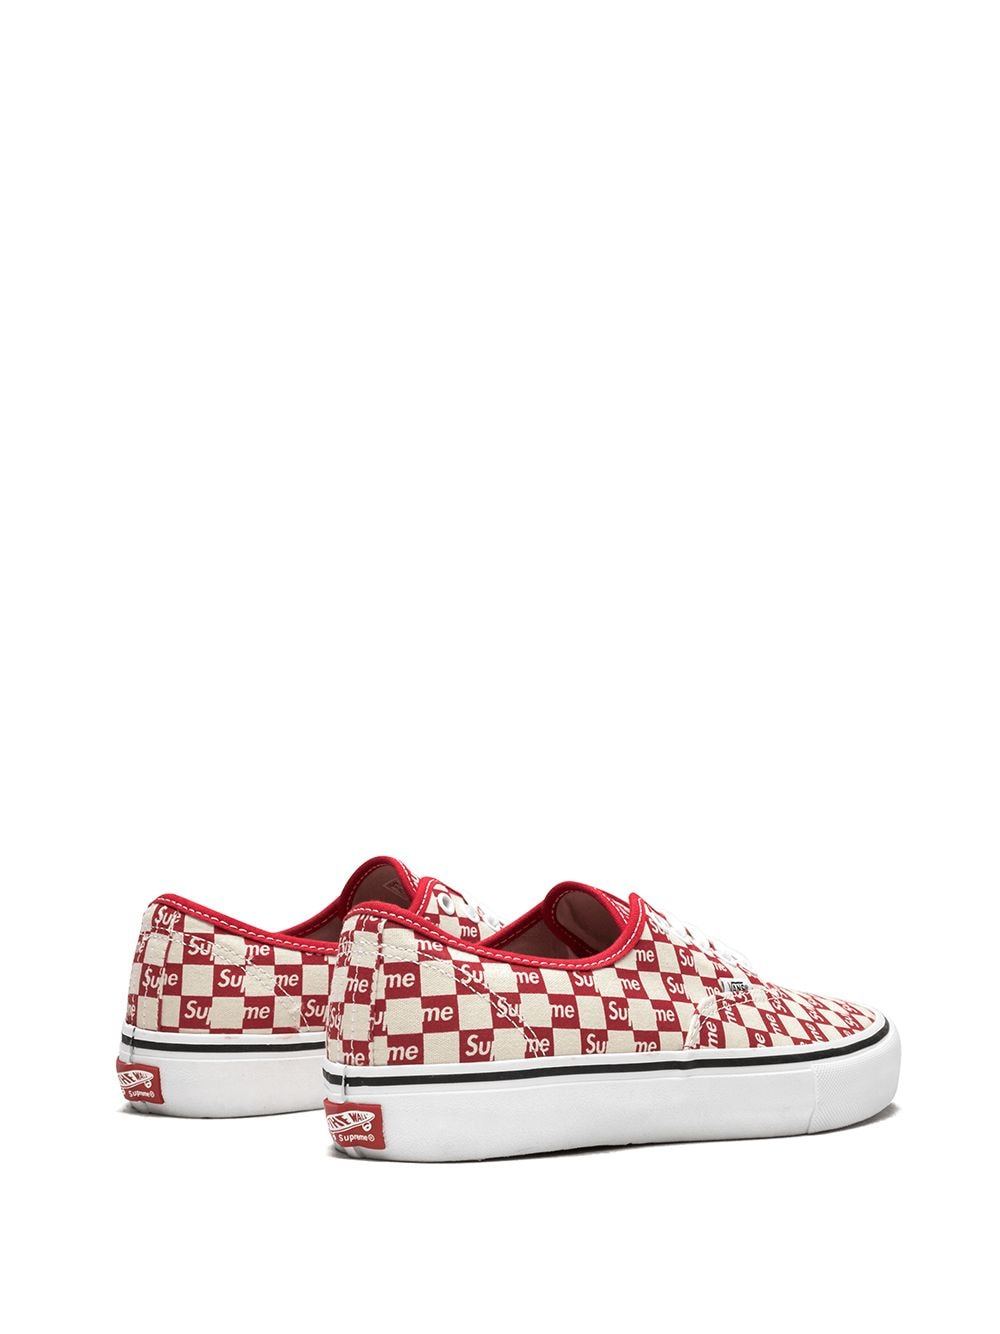 Vans X Supreme Authentic Pro Supreme Checkered Red Low Top Sneakers ...